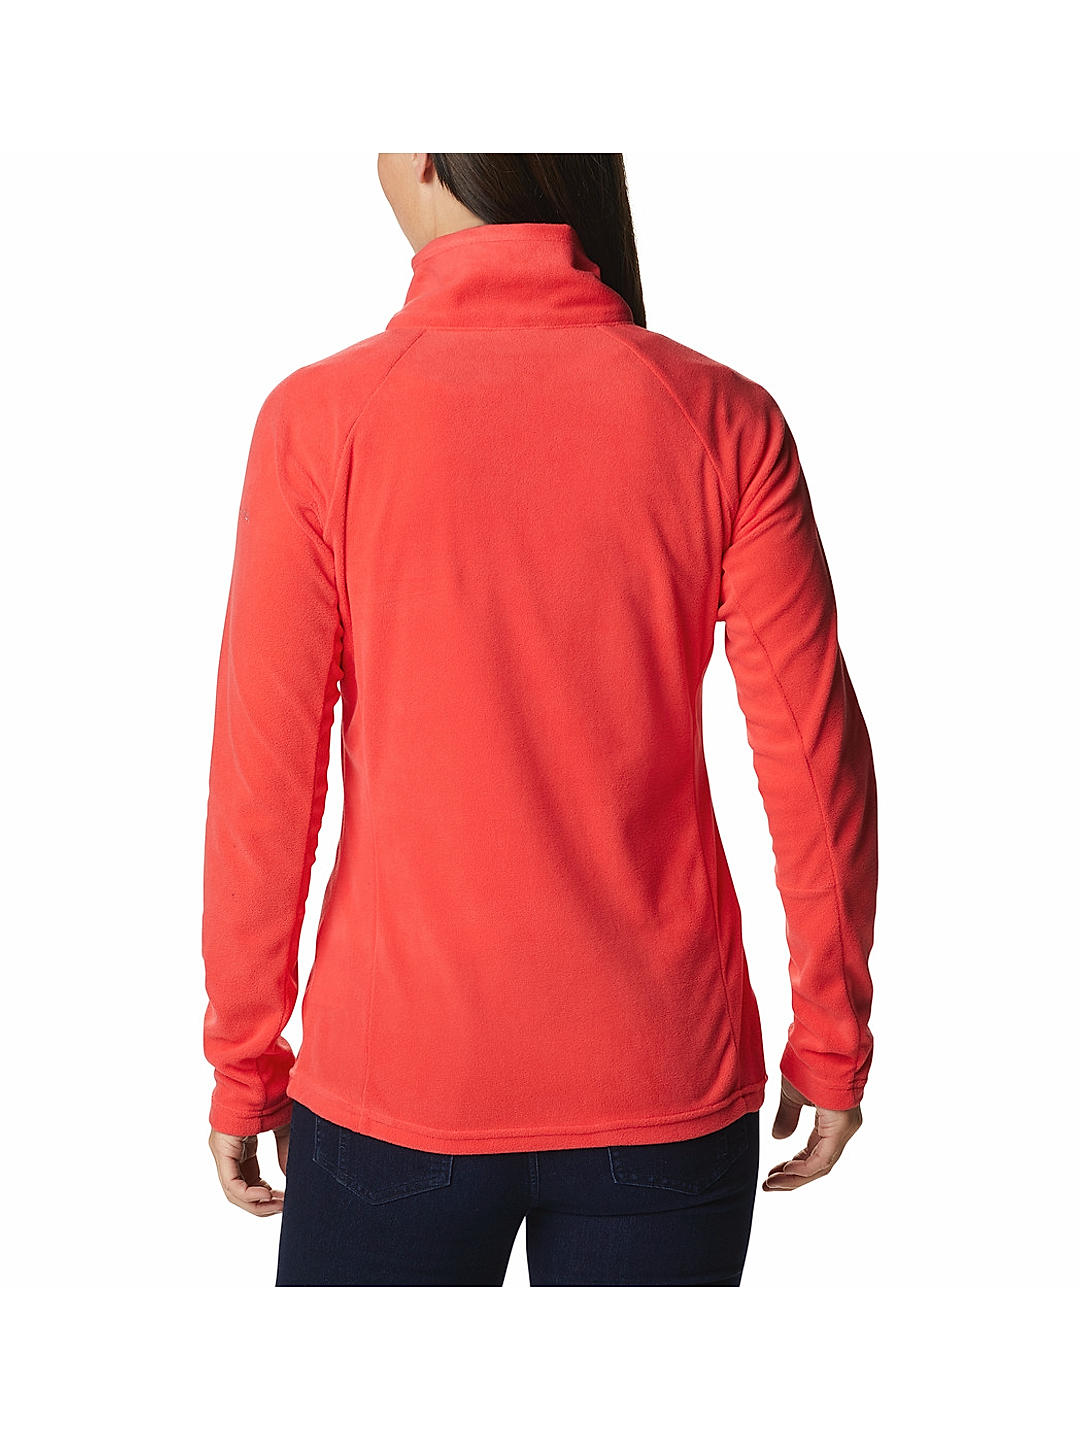 Buy Red Glacial Iv 1/2 Zip for Women Online at Columbia Sportswear